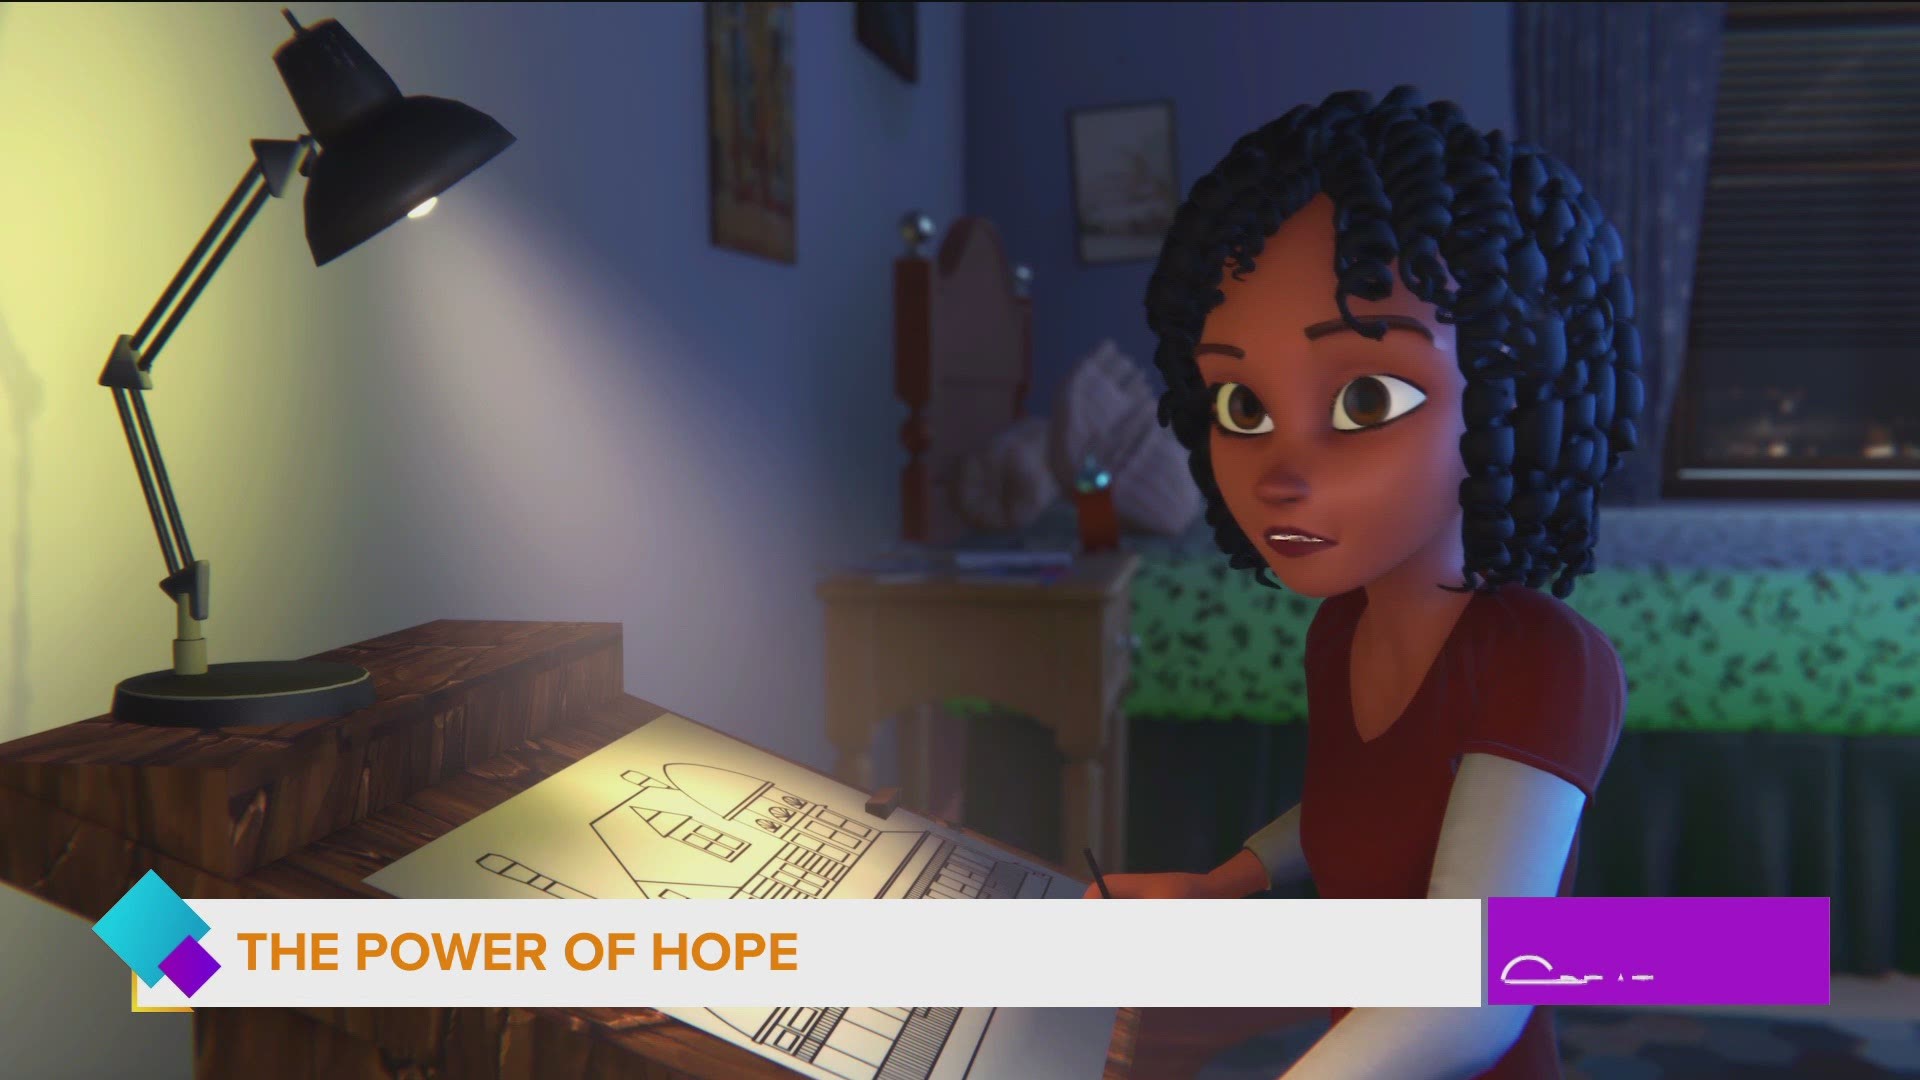 Kalia Love Jones directed and produced an animated short film in hopes of inspiring young kids to achieve their dreams. For more info visit thepowerofhopefilm.com